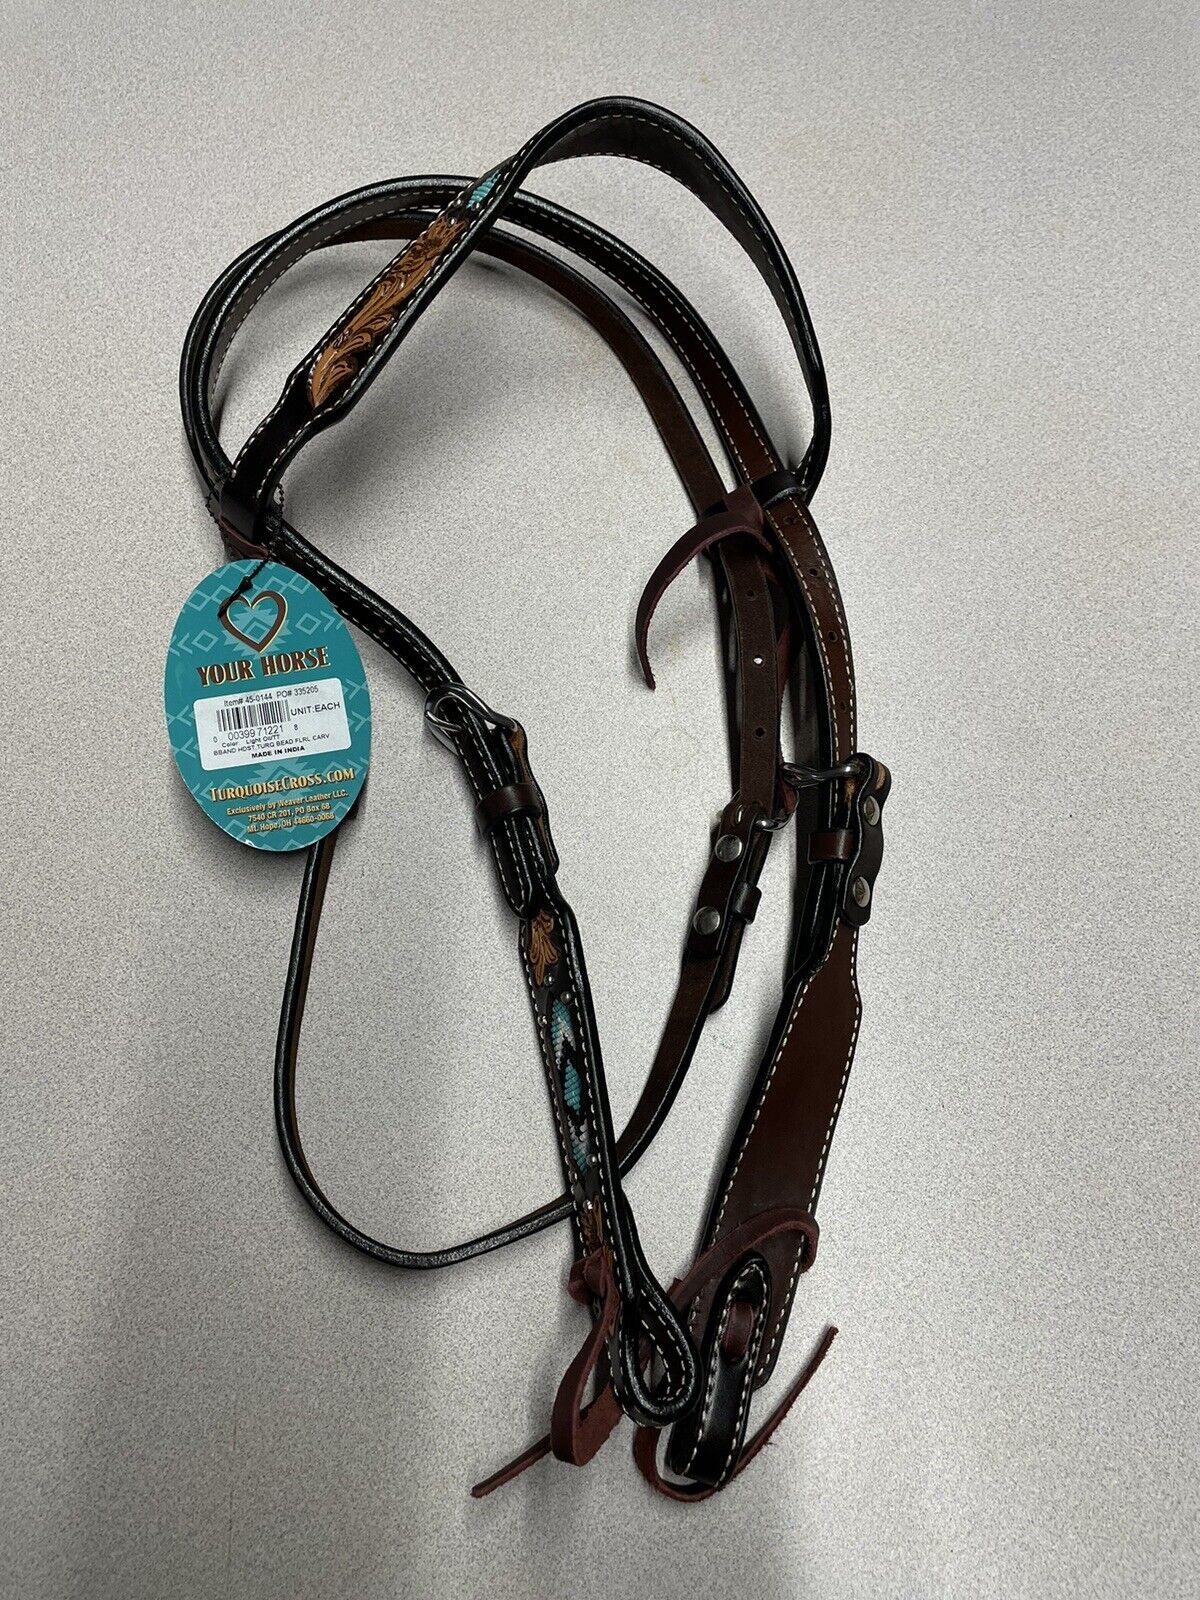 🐴 Weaver Leather Turquoise Cross 45-0144 Beaded Browband Headstall New